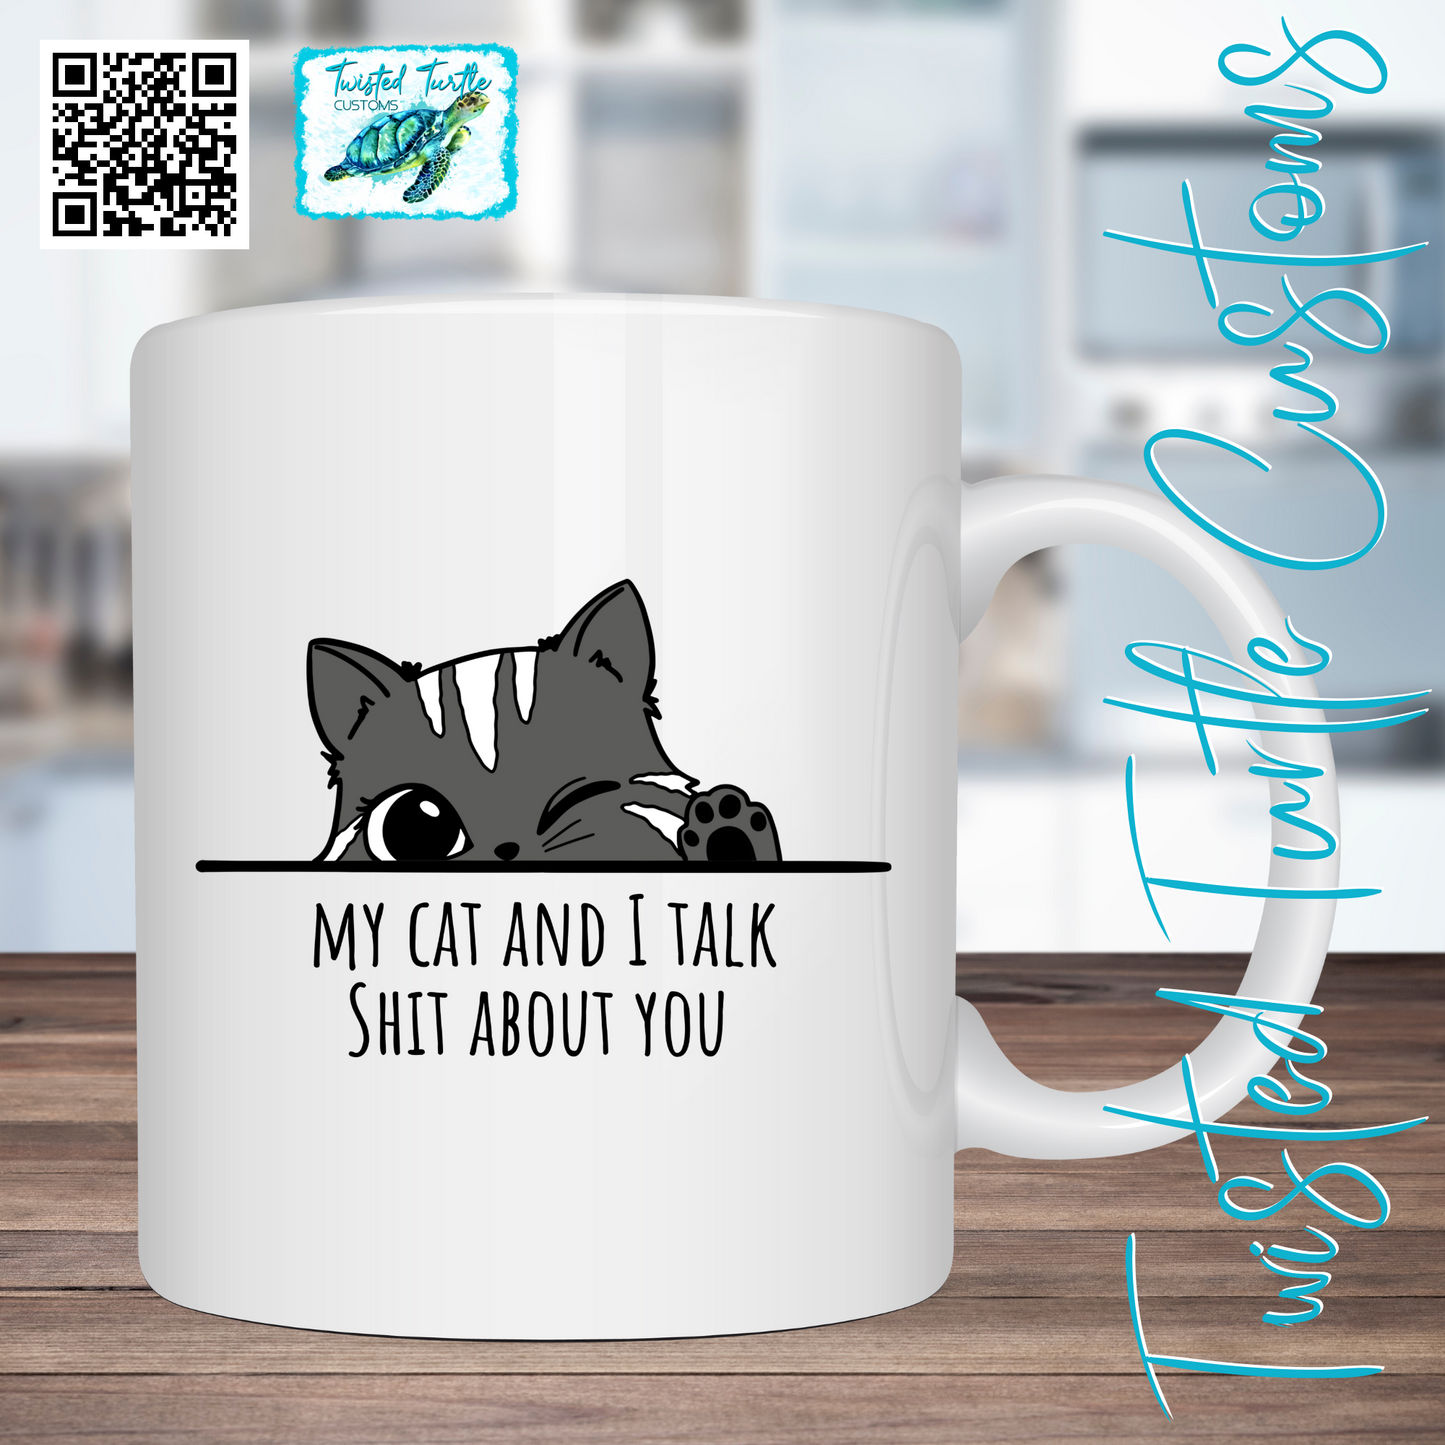 Funny Gray Cat My Cat and I talk shit about you Coffee Mug Humor